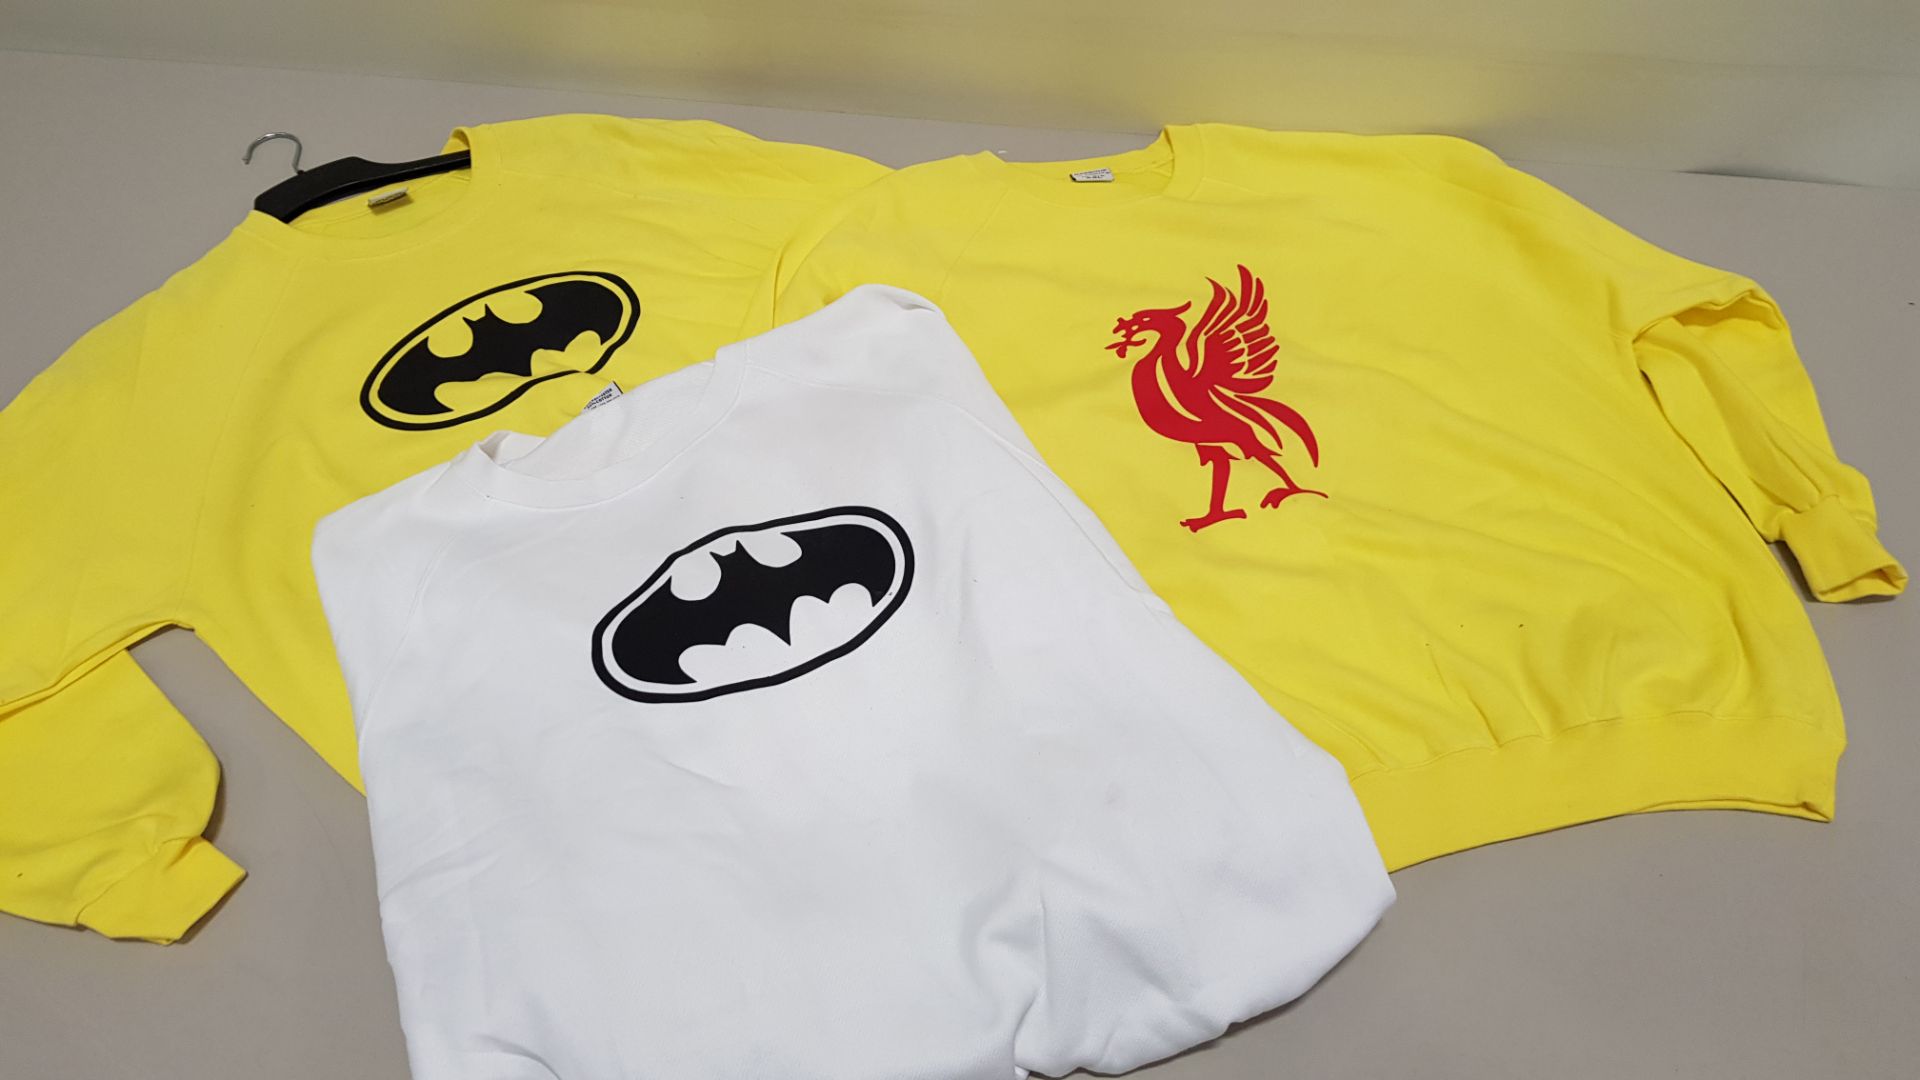 50 PIECE CLOTHING LOT CONTAINING YELLOW BATMAN JUMPERS, YELLOW LIVERPOOL JUMPERS AND WHITE BATMAN